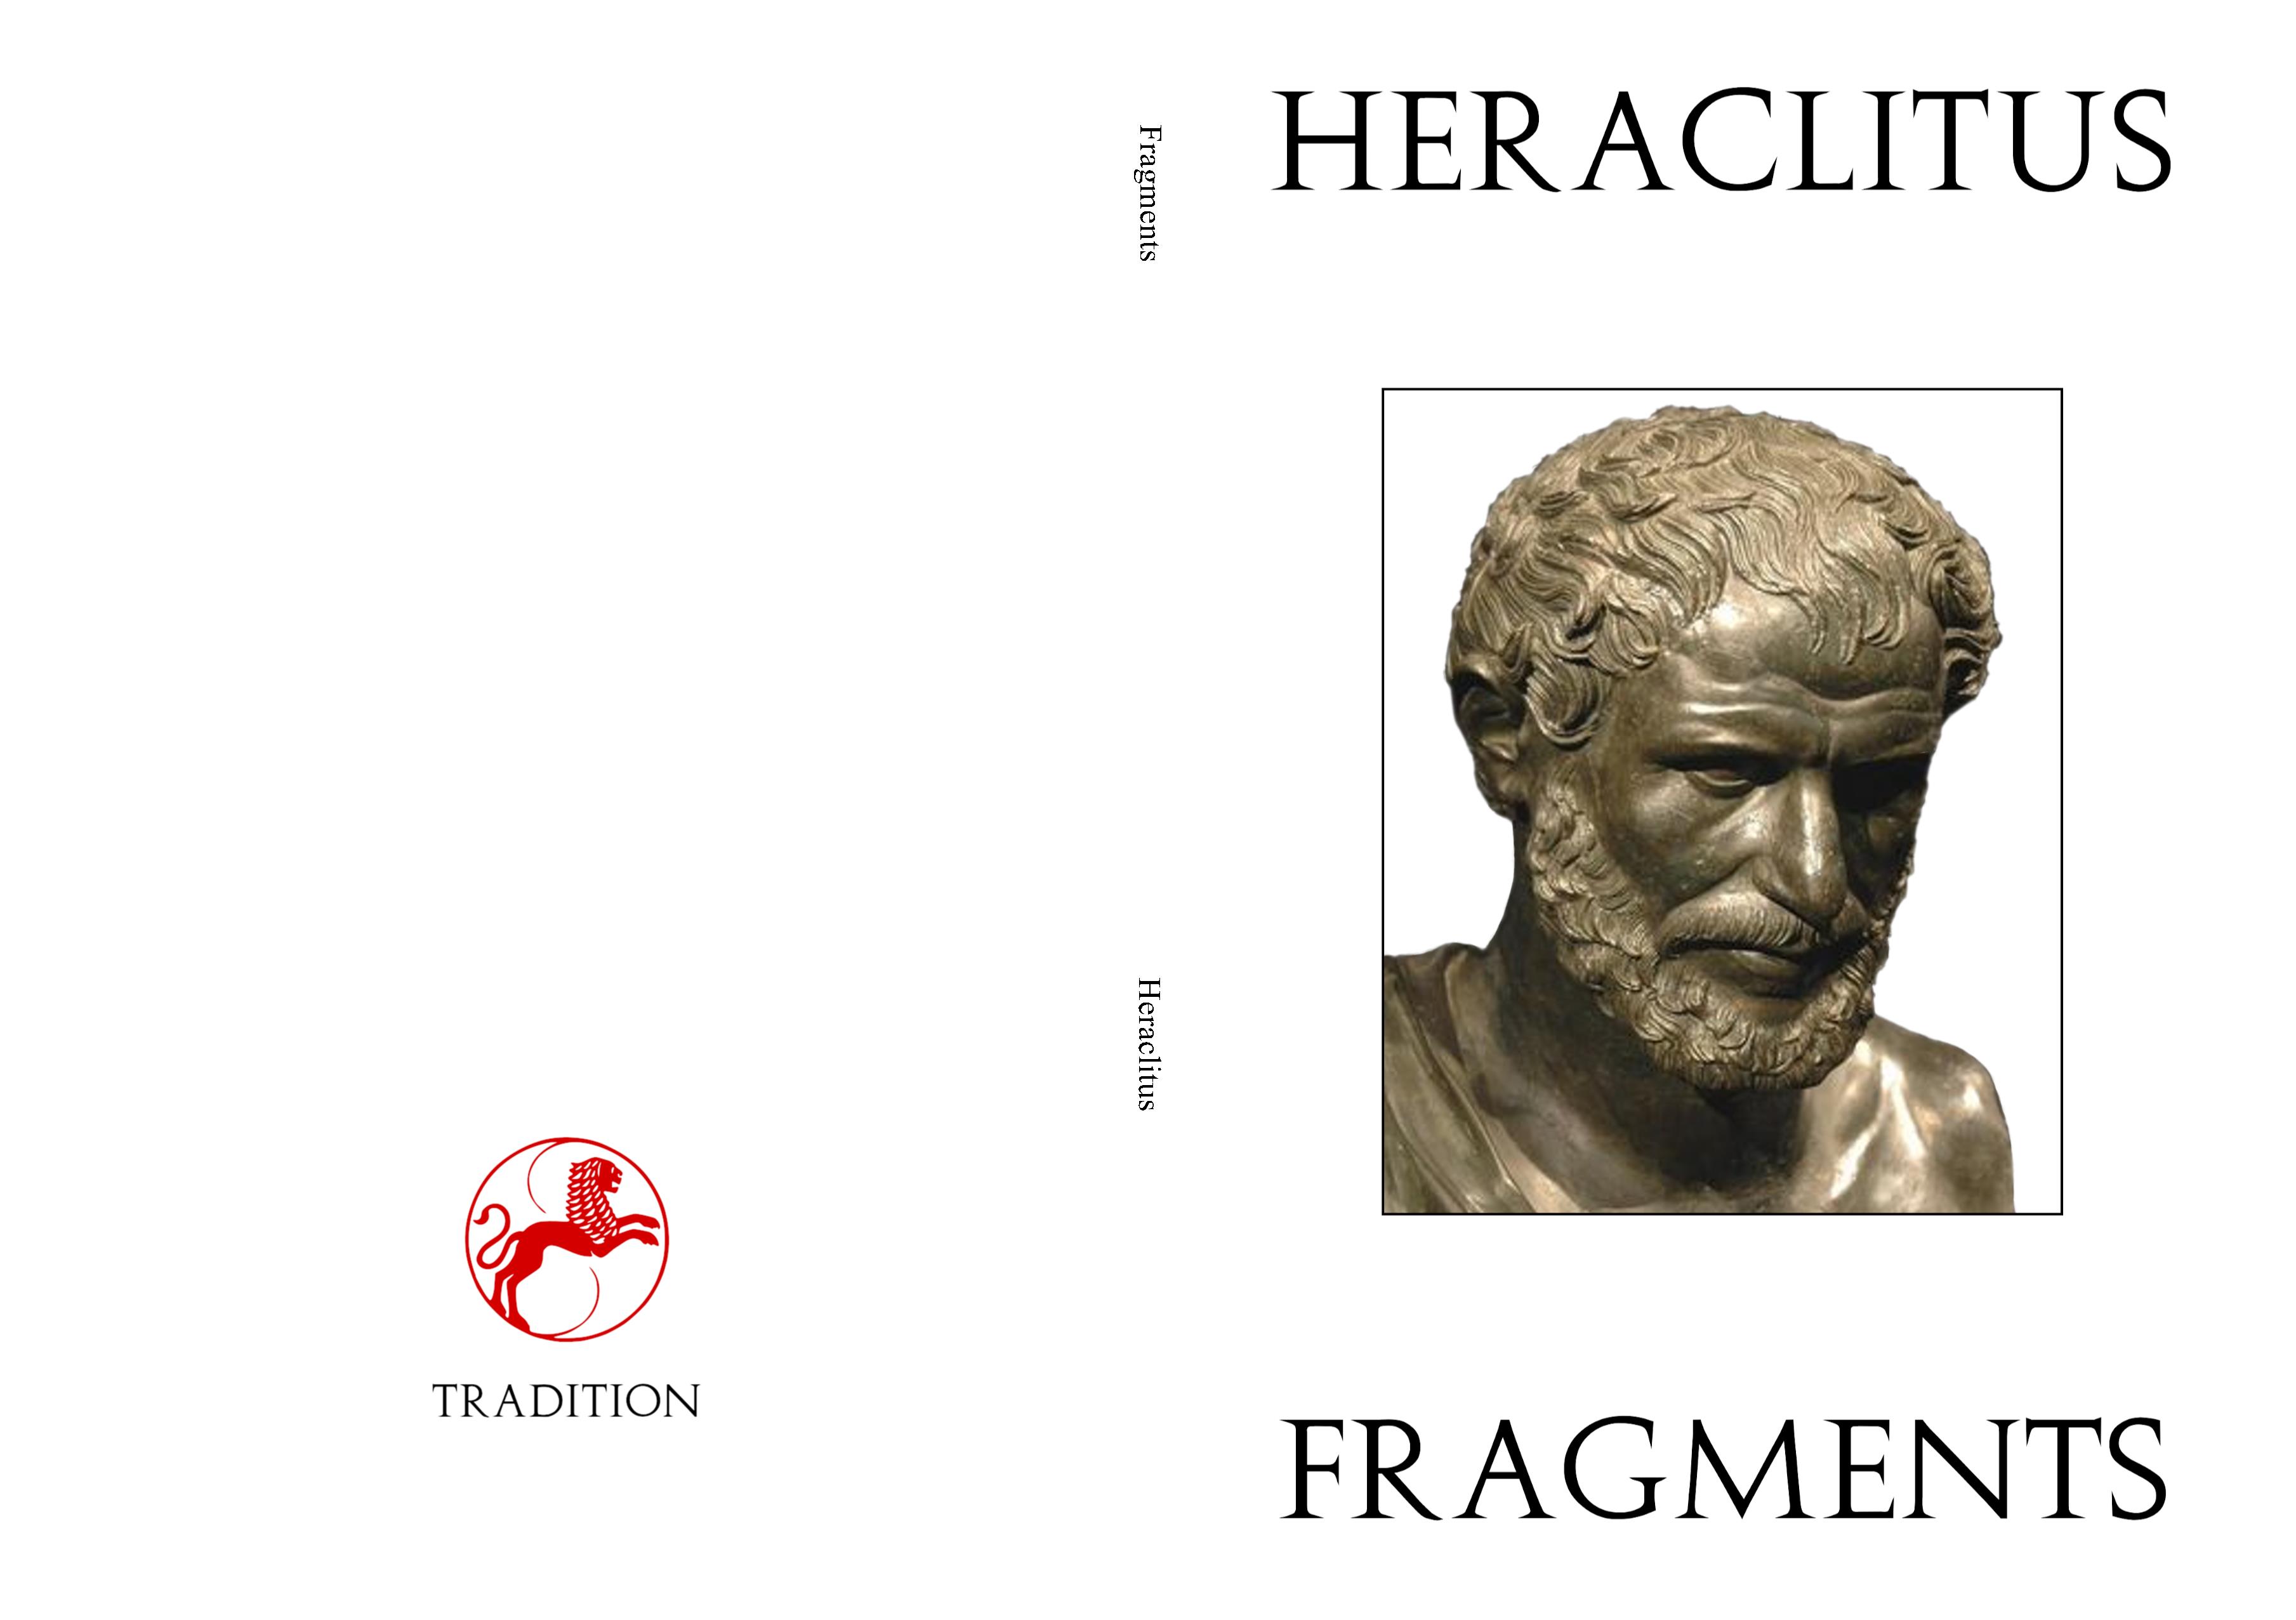 The Fragments cover image